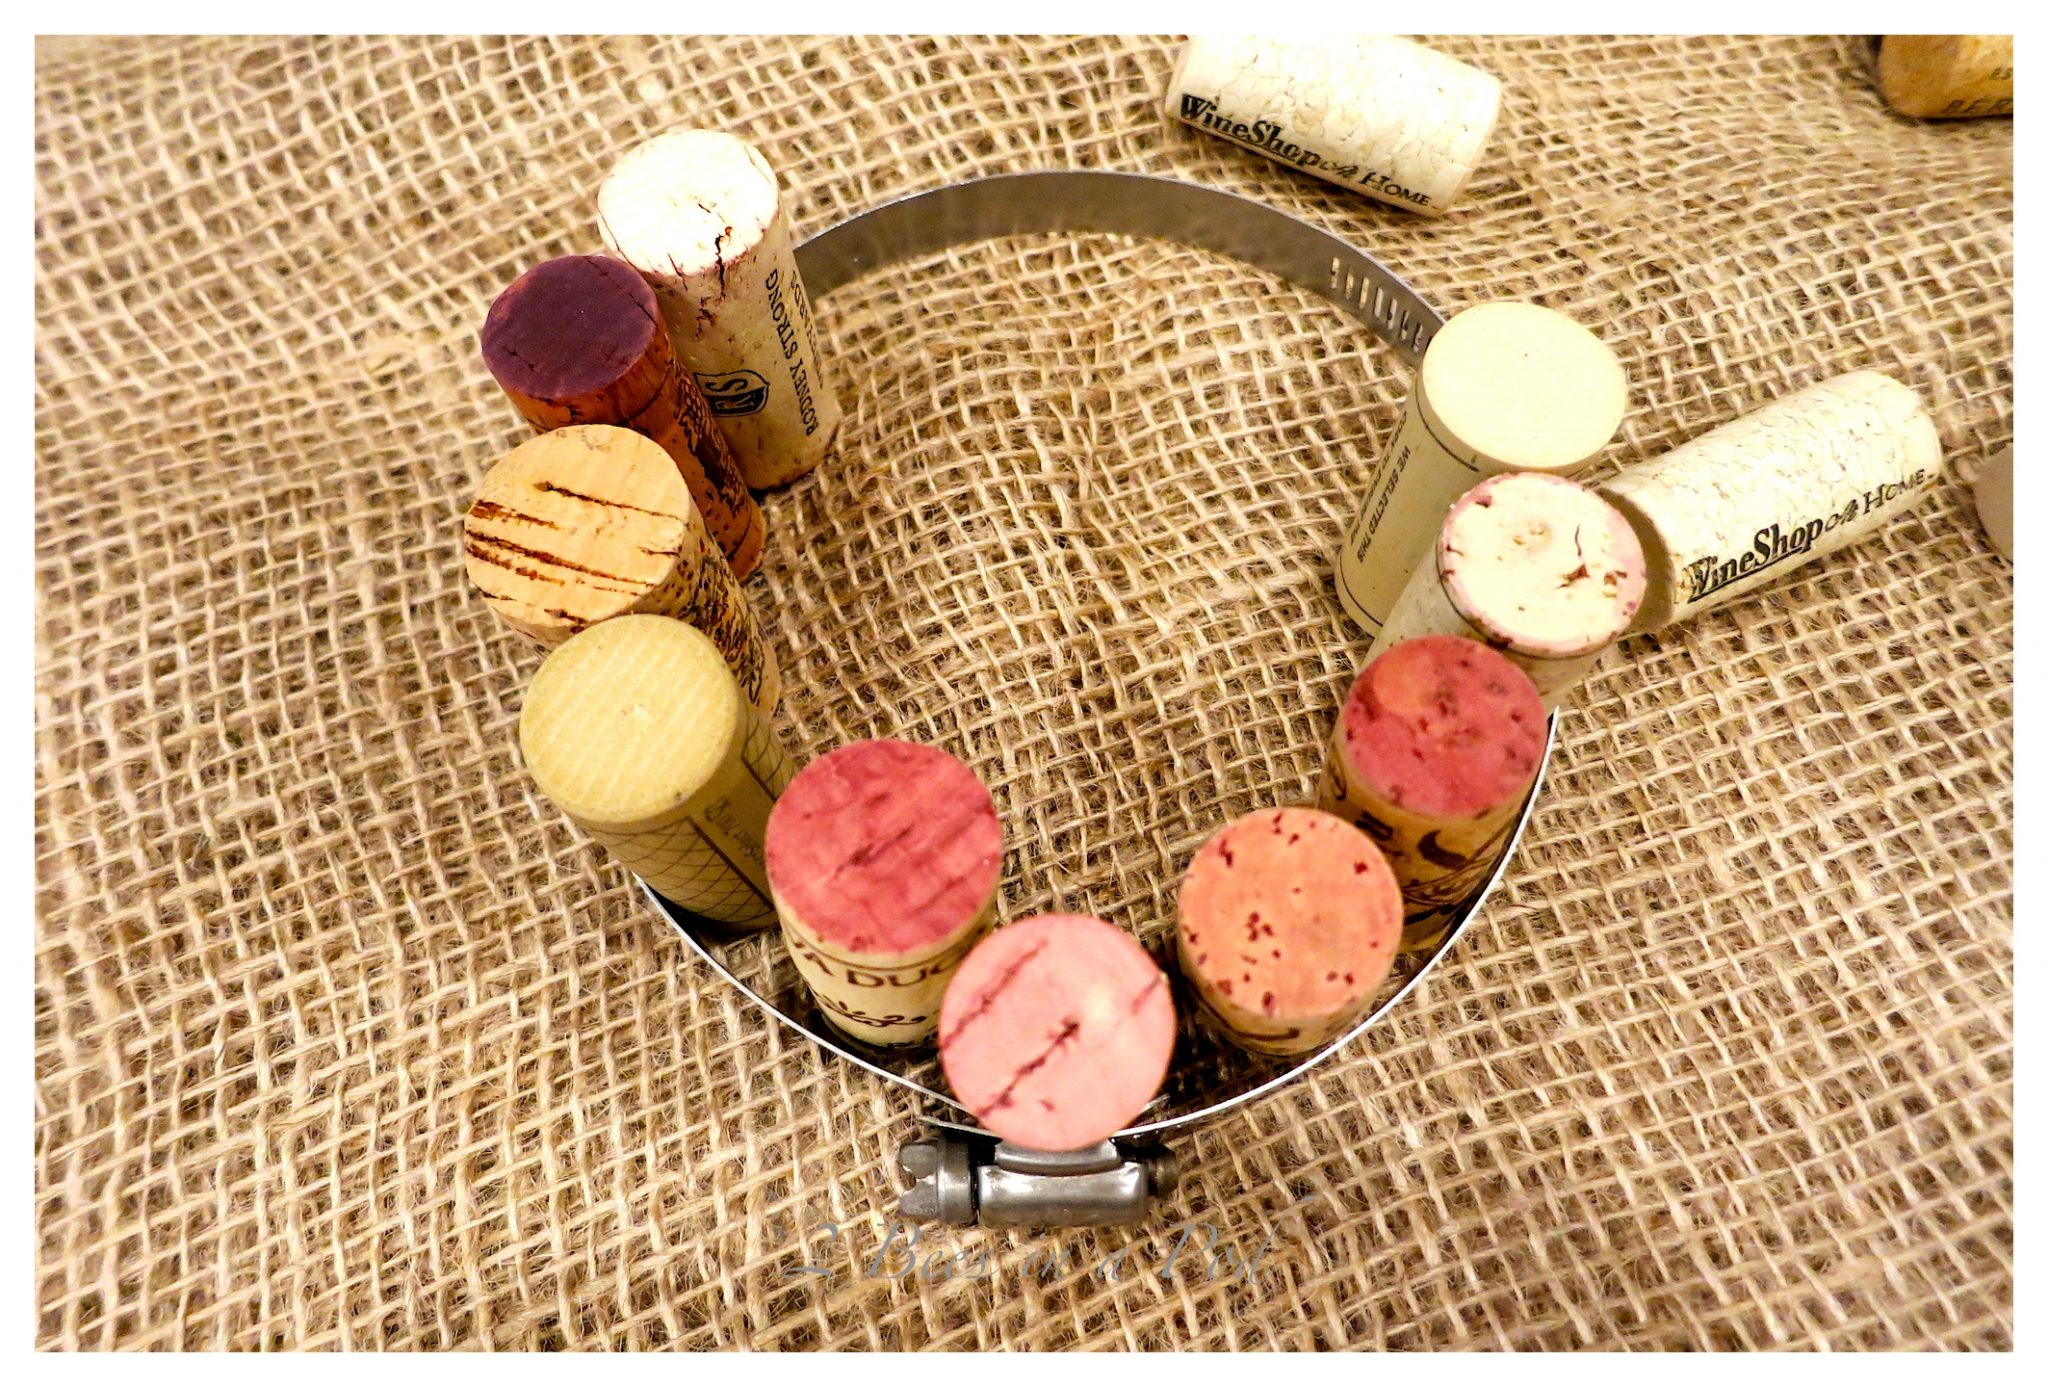 Easy DIY Wine Cork Hot Pad - just use a clamp and leftover wine cork and hot glue.